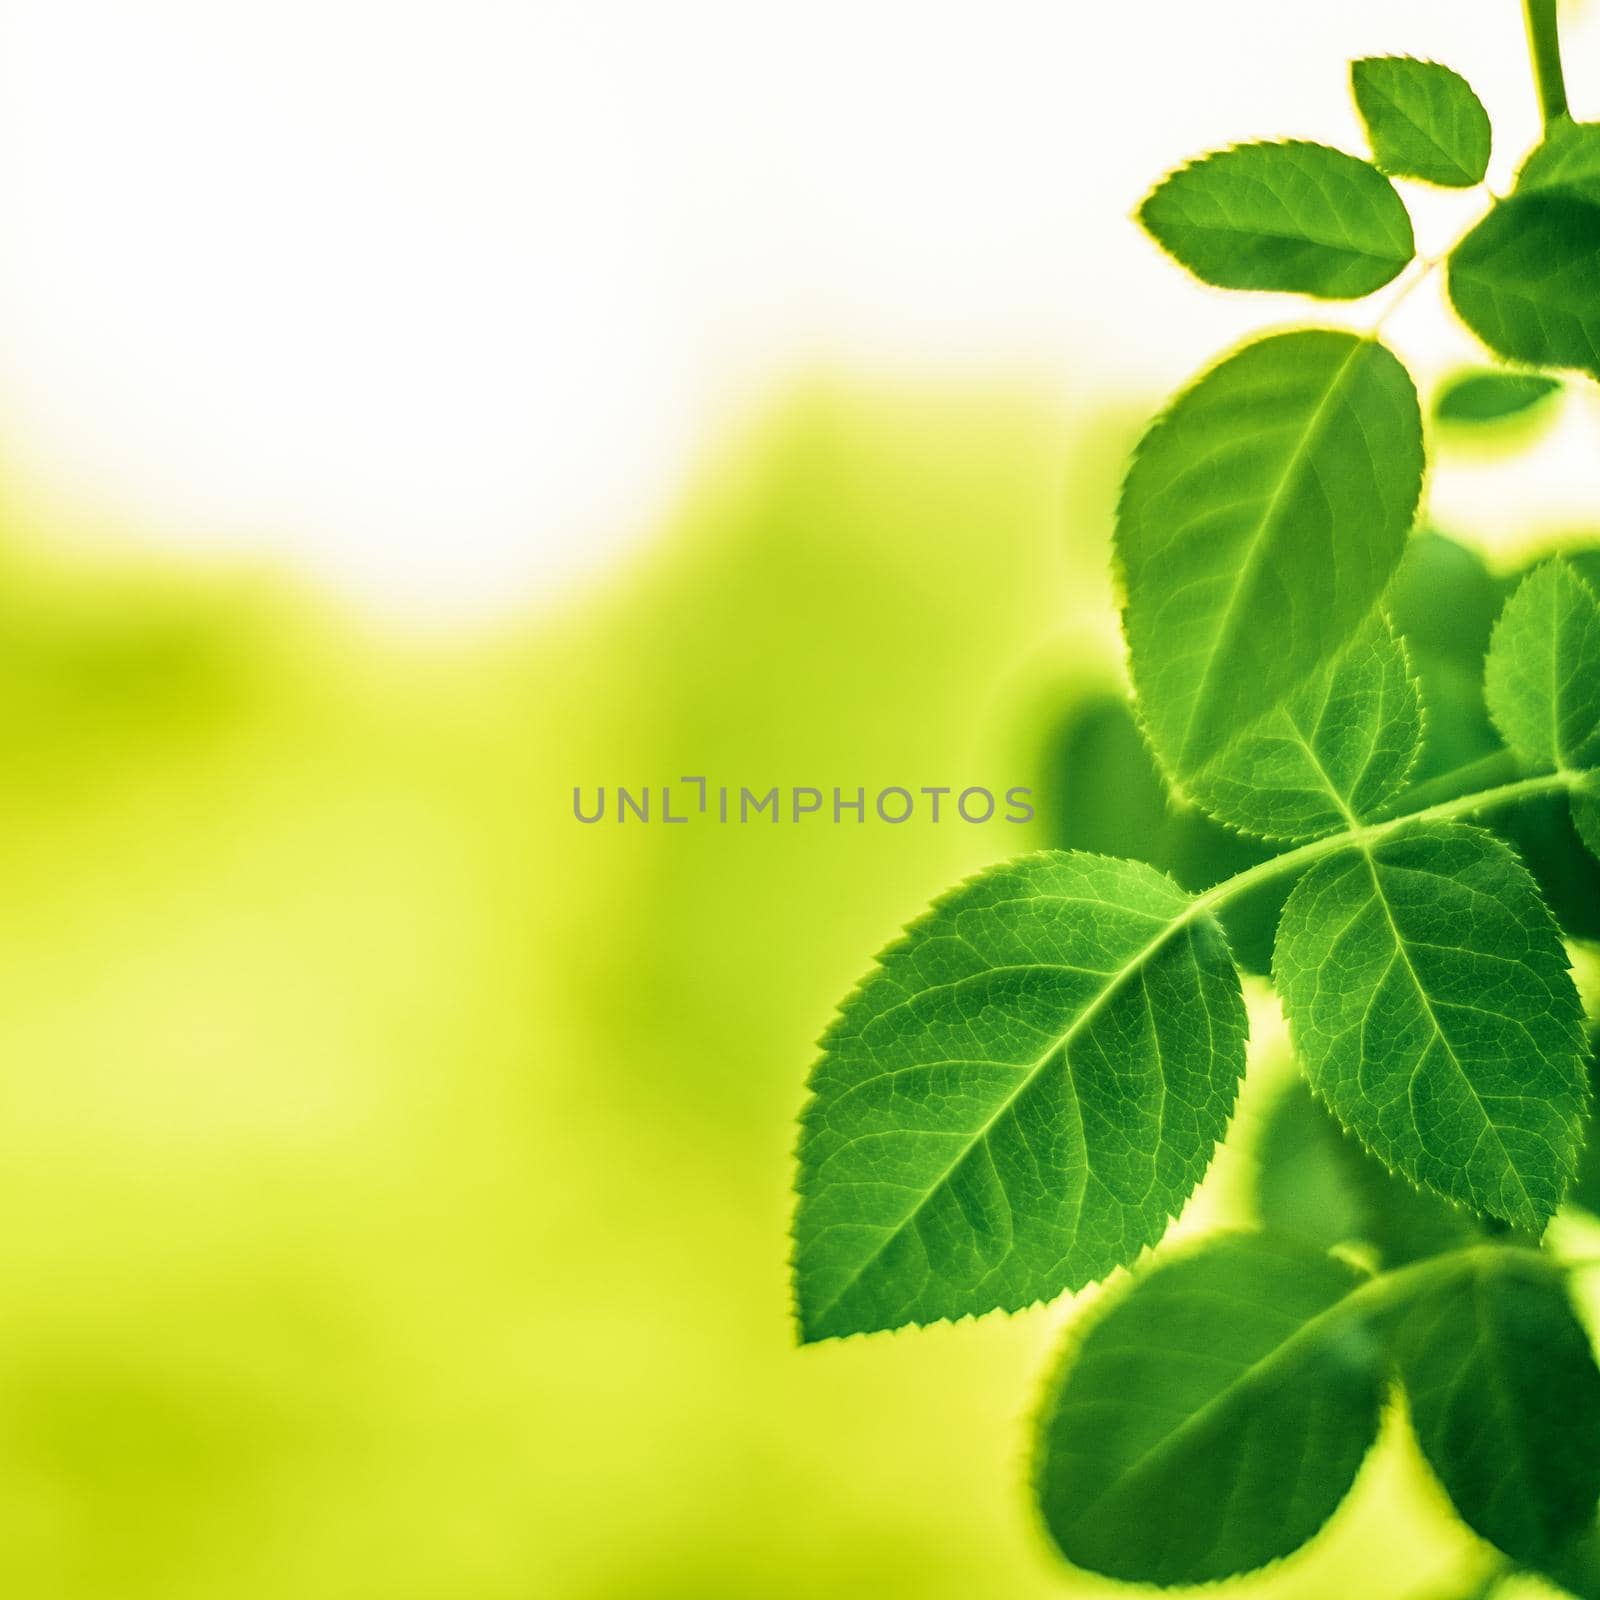 green leaves - nature backgrounds and springtime styled concept